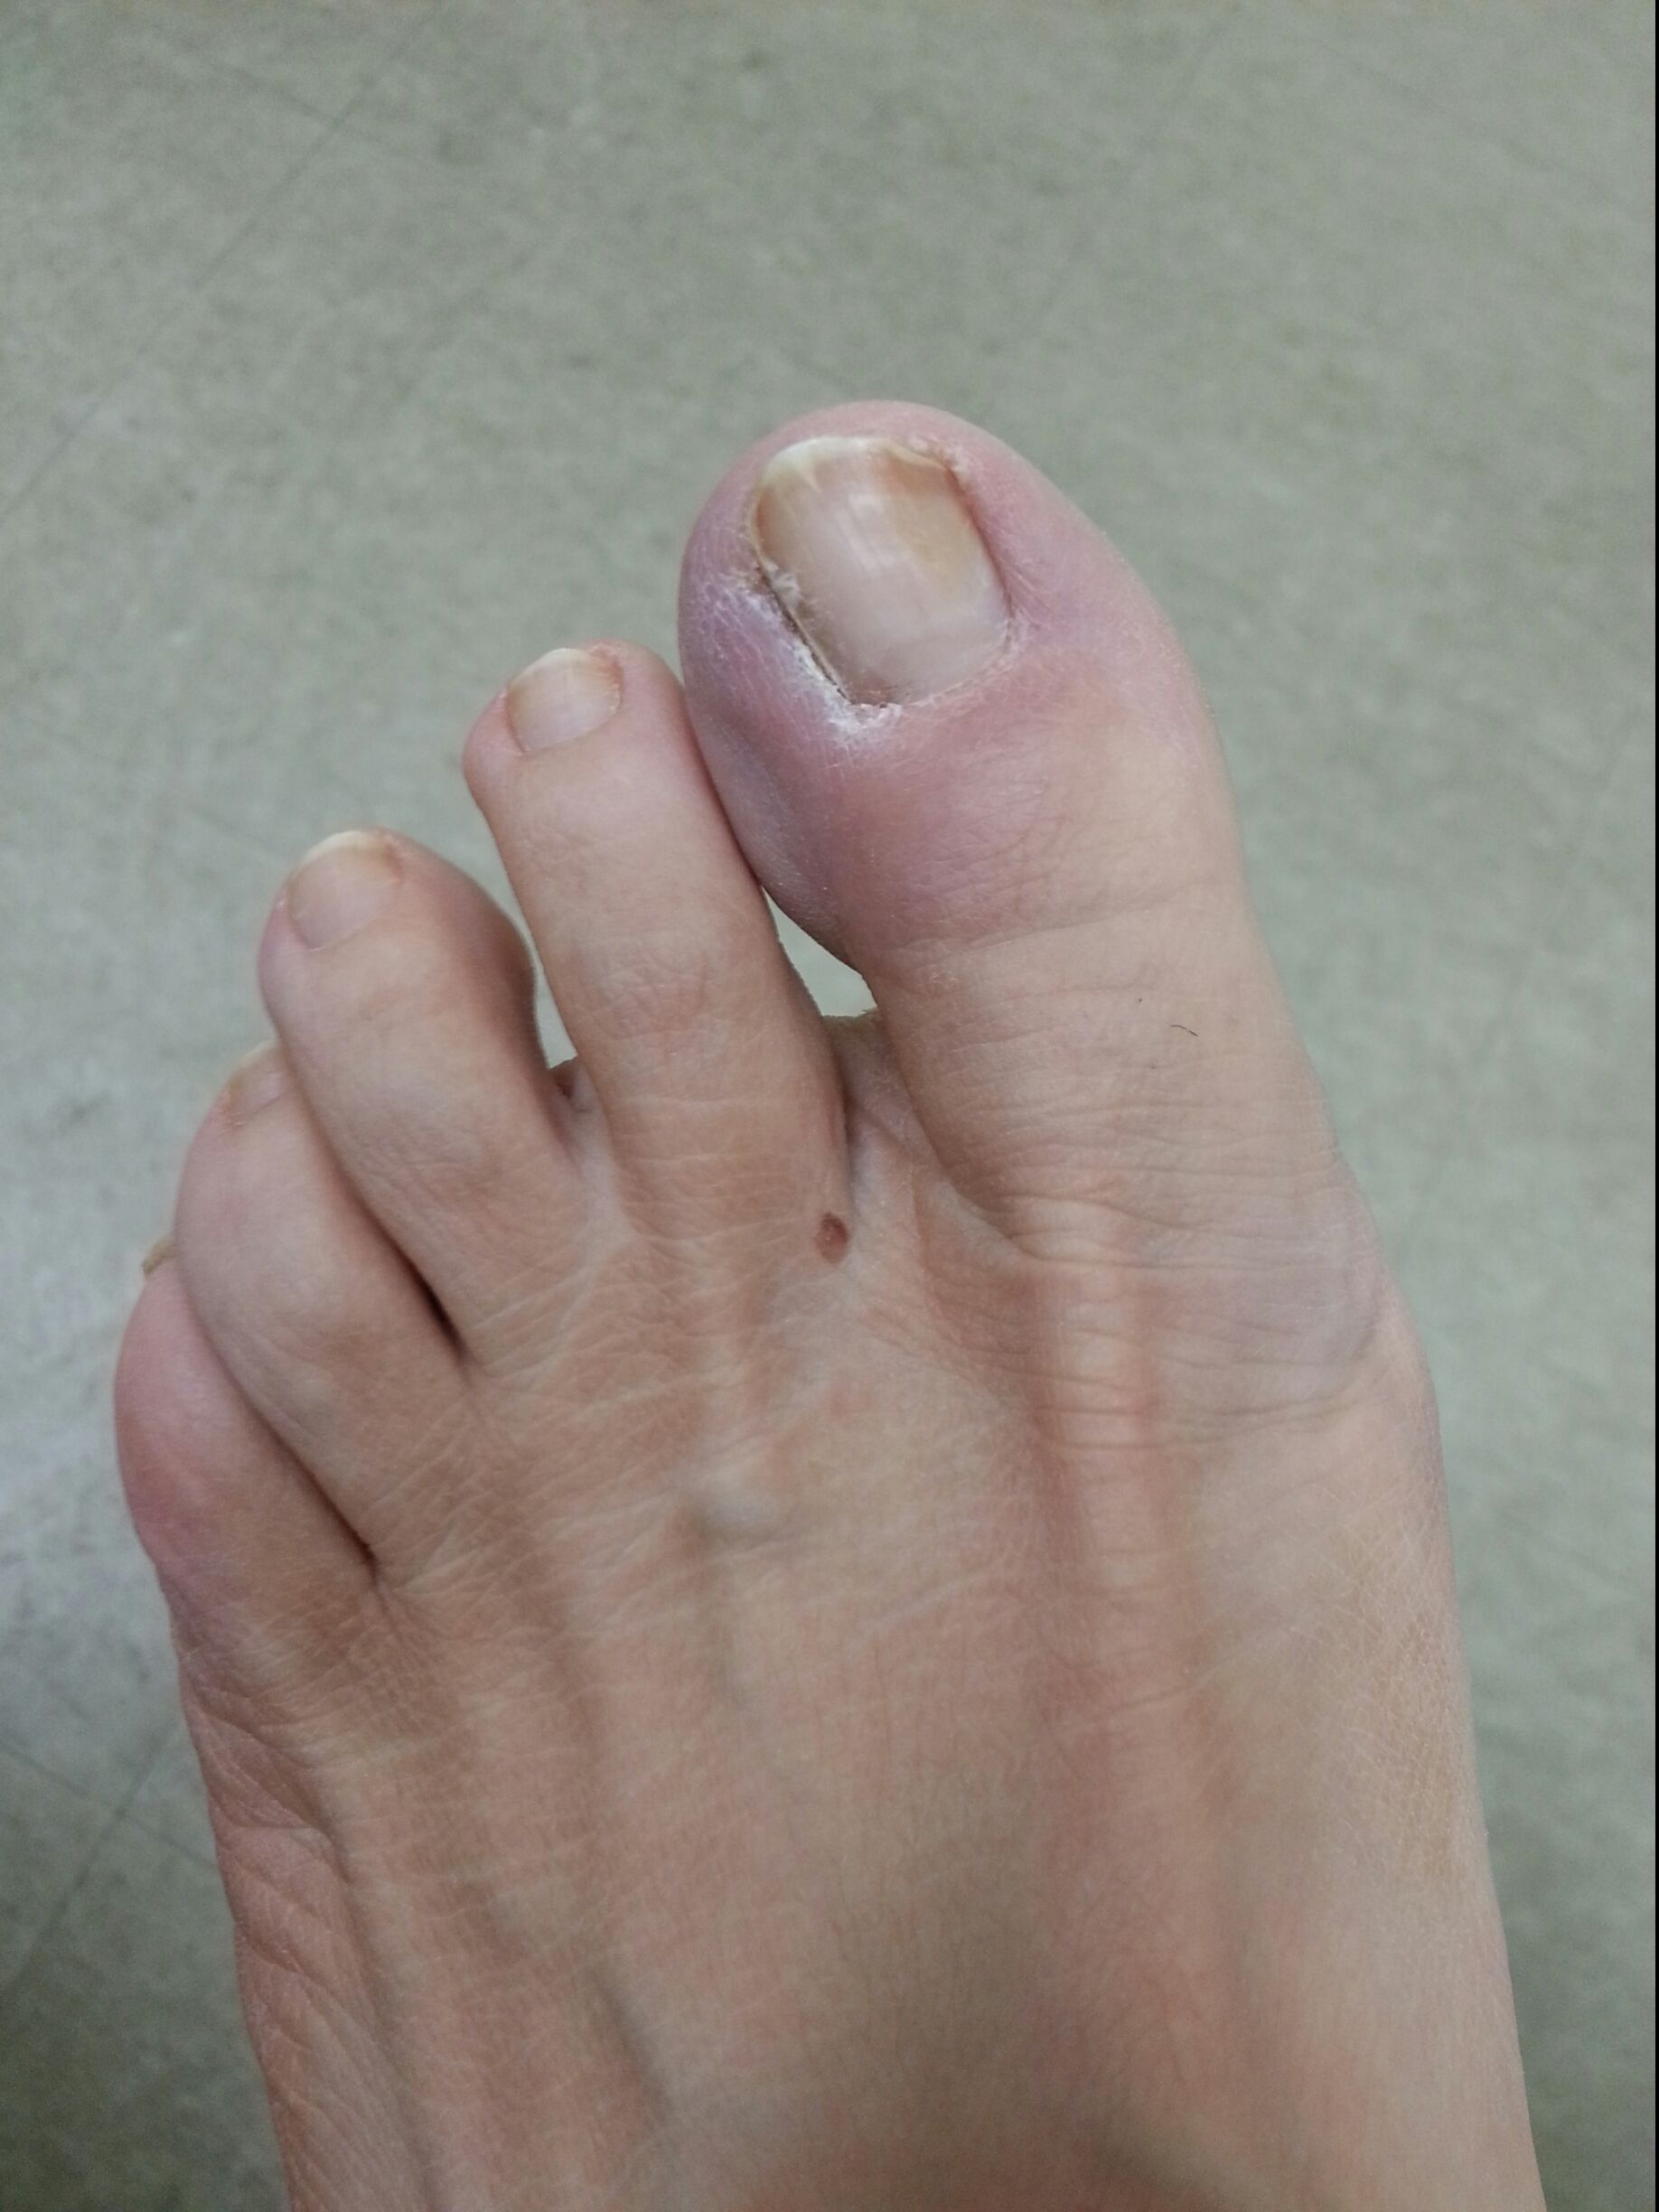 Picture of Fungal Nail Infection - WebMD